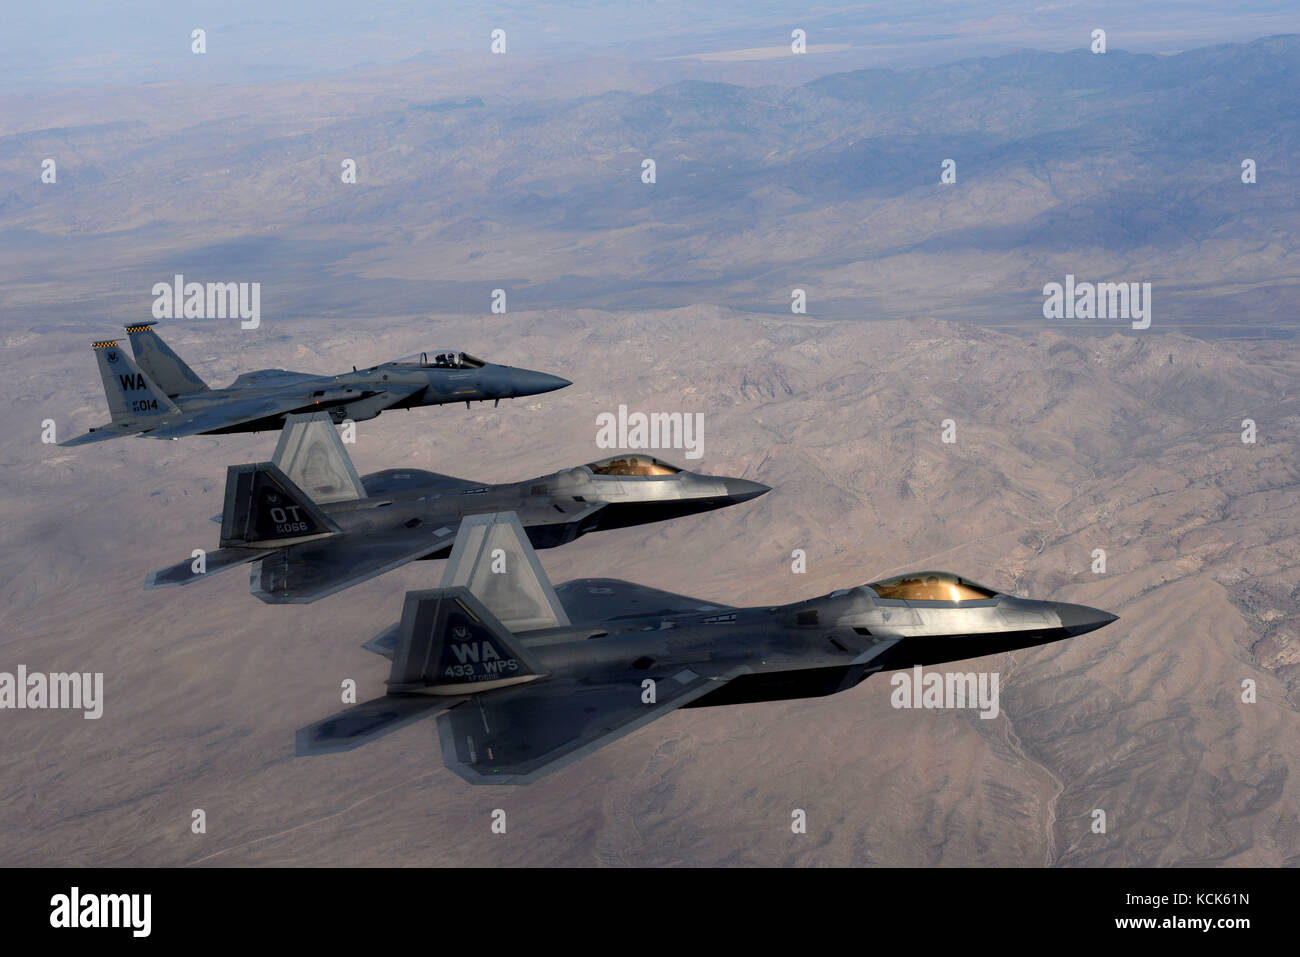 U.S. Air Force F-22 Raptor and F-15 Eagle stealth tactical fighter aircraft fly in formation over the Nellis Air Force Base Nevada Test and Training Range July 10, 2017 near Las Vegas, Nevada.  (photo by Daryn Murphy via Planetpix) Stock Photo